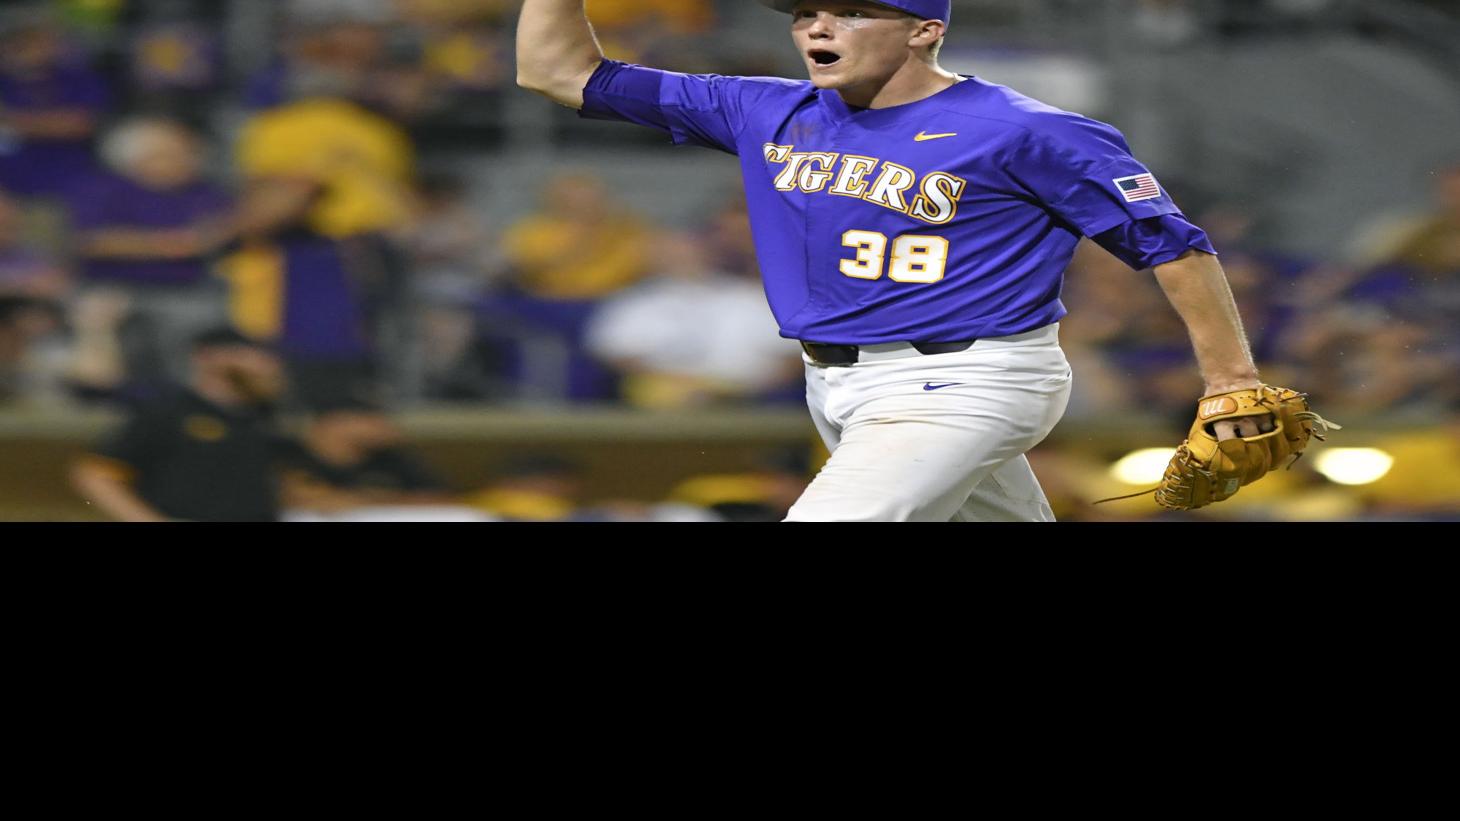 There is a tall legend brewing at LSU — Zack Hess